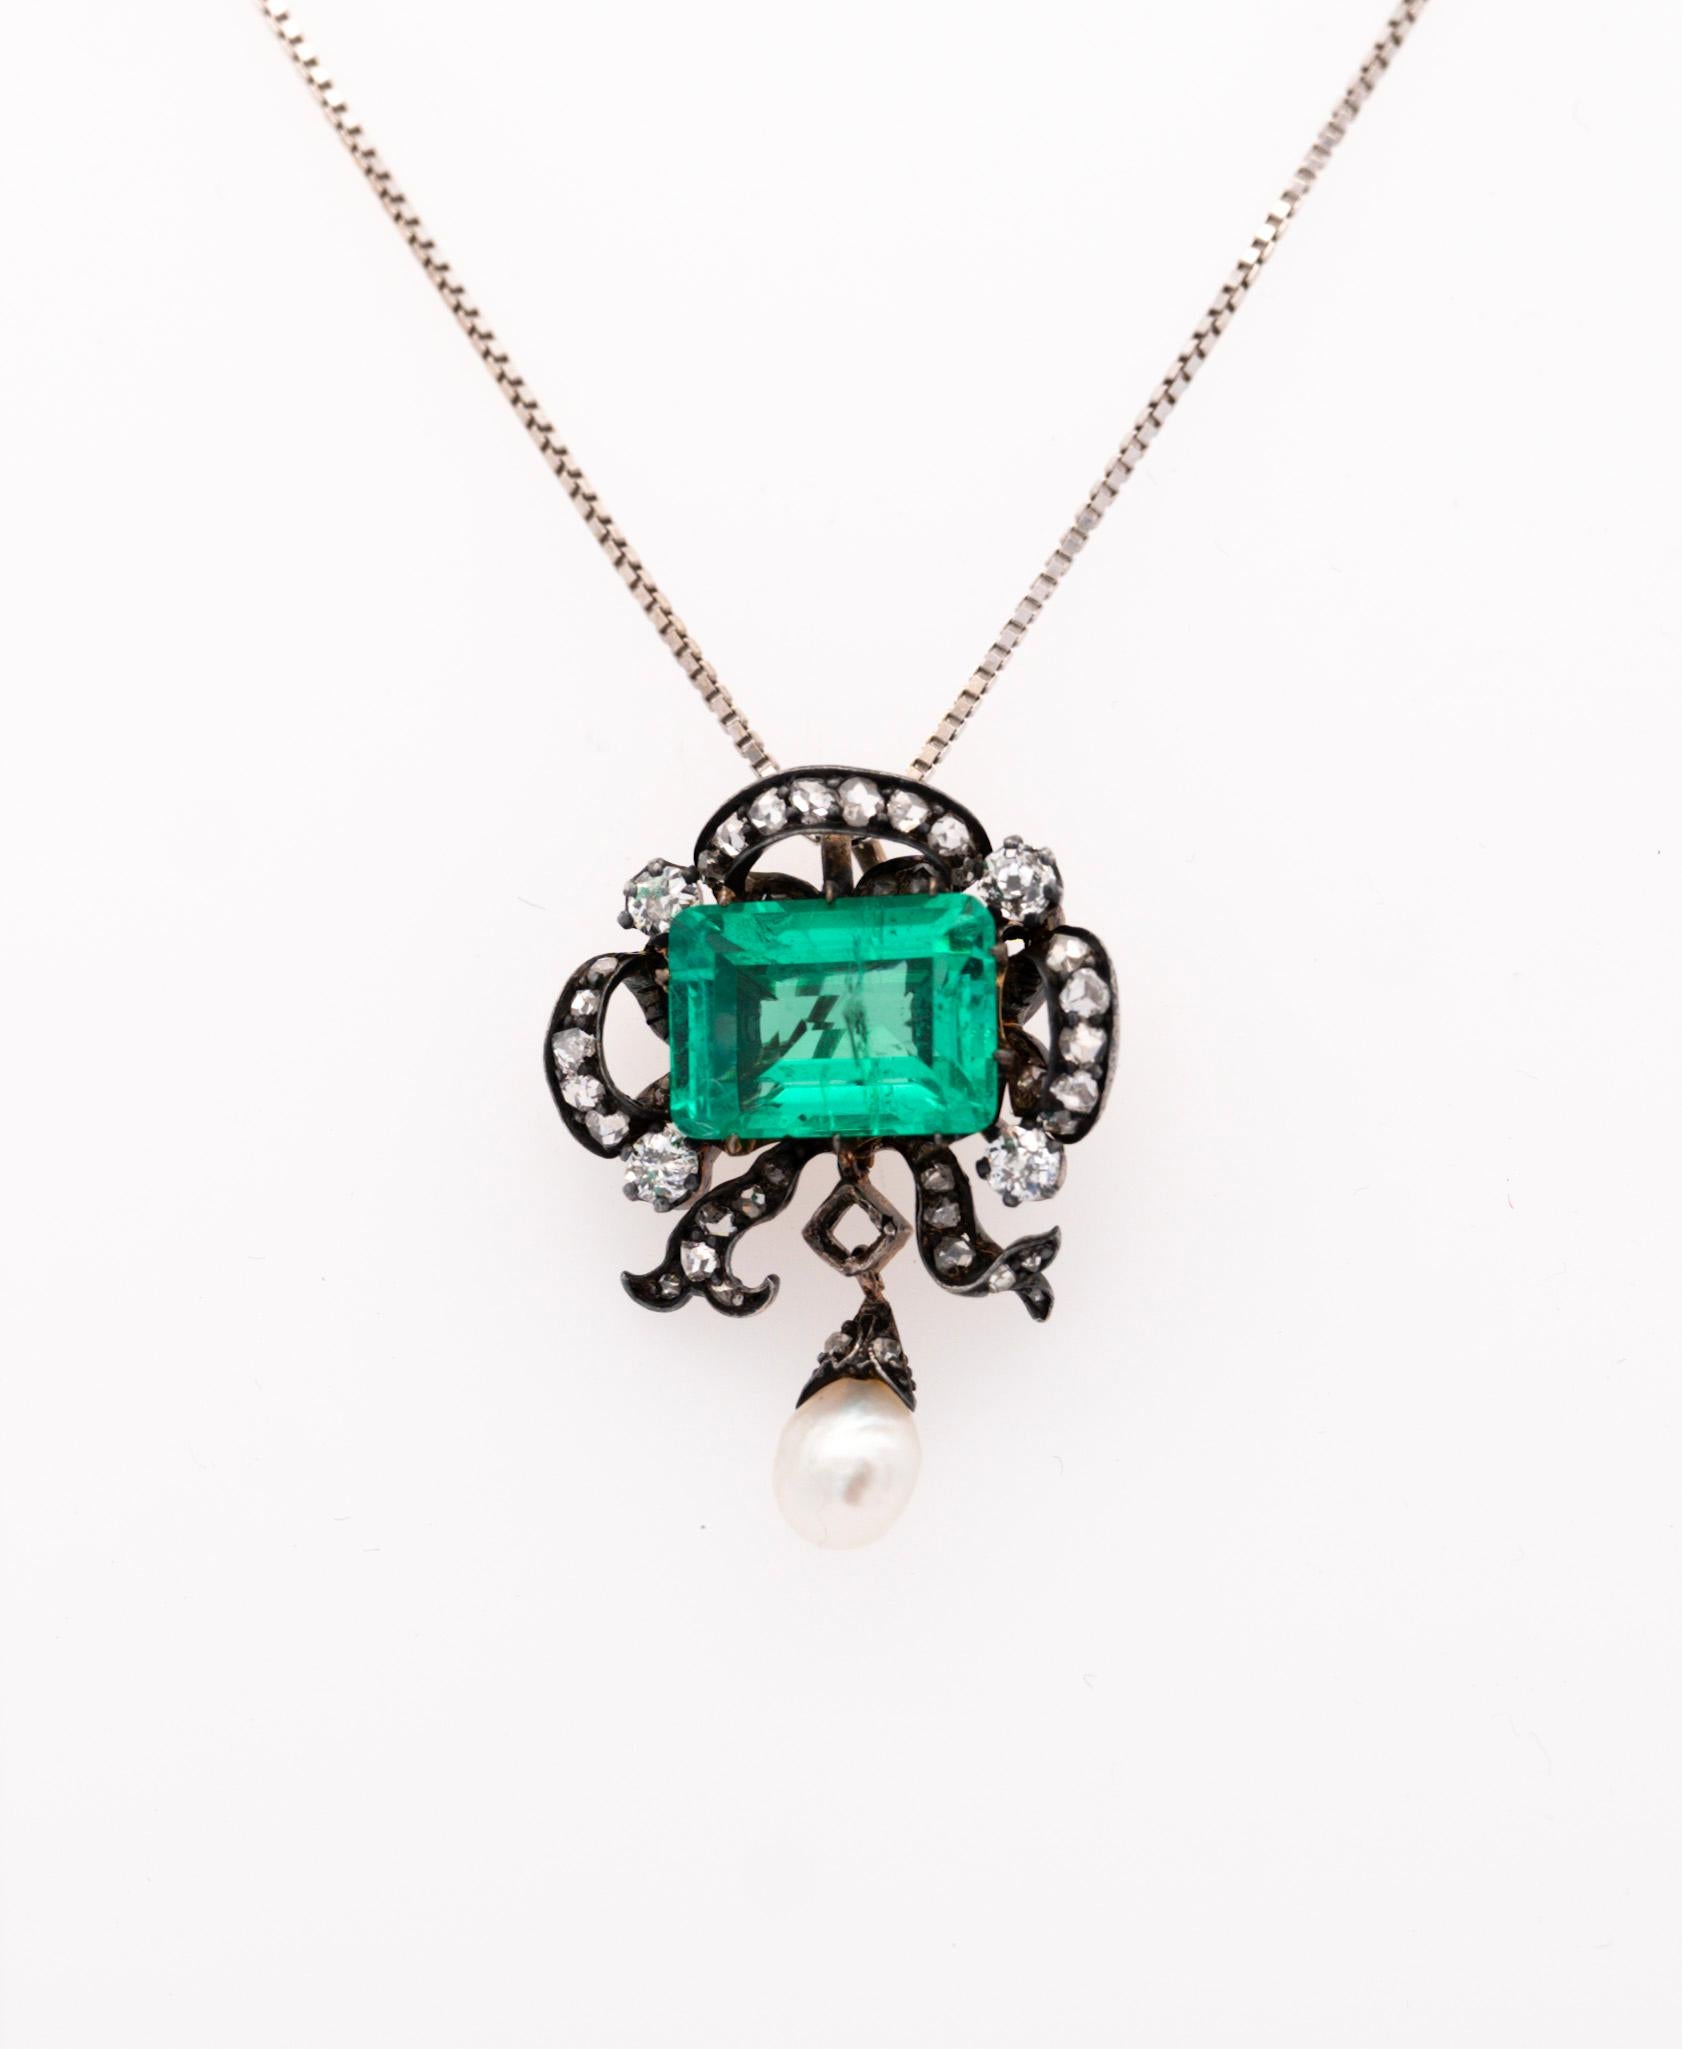 Expert craftsmanship and magisterial gemstones from a bygone era, the Victorian period. This silver pendant bears a 3.65 carat (approx.) emerald center stone, adorned with 34  old mine and single cut diamonds, and finally complemented with a